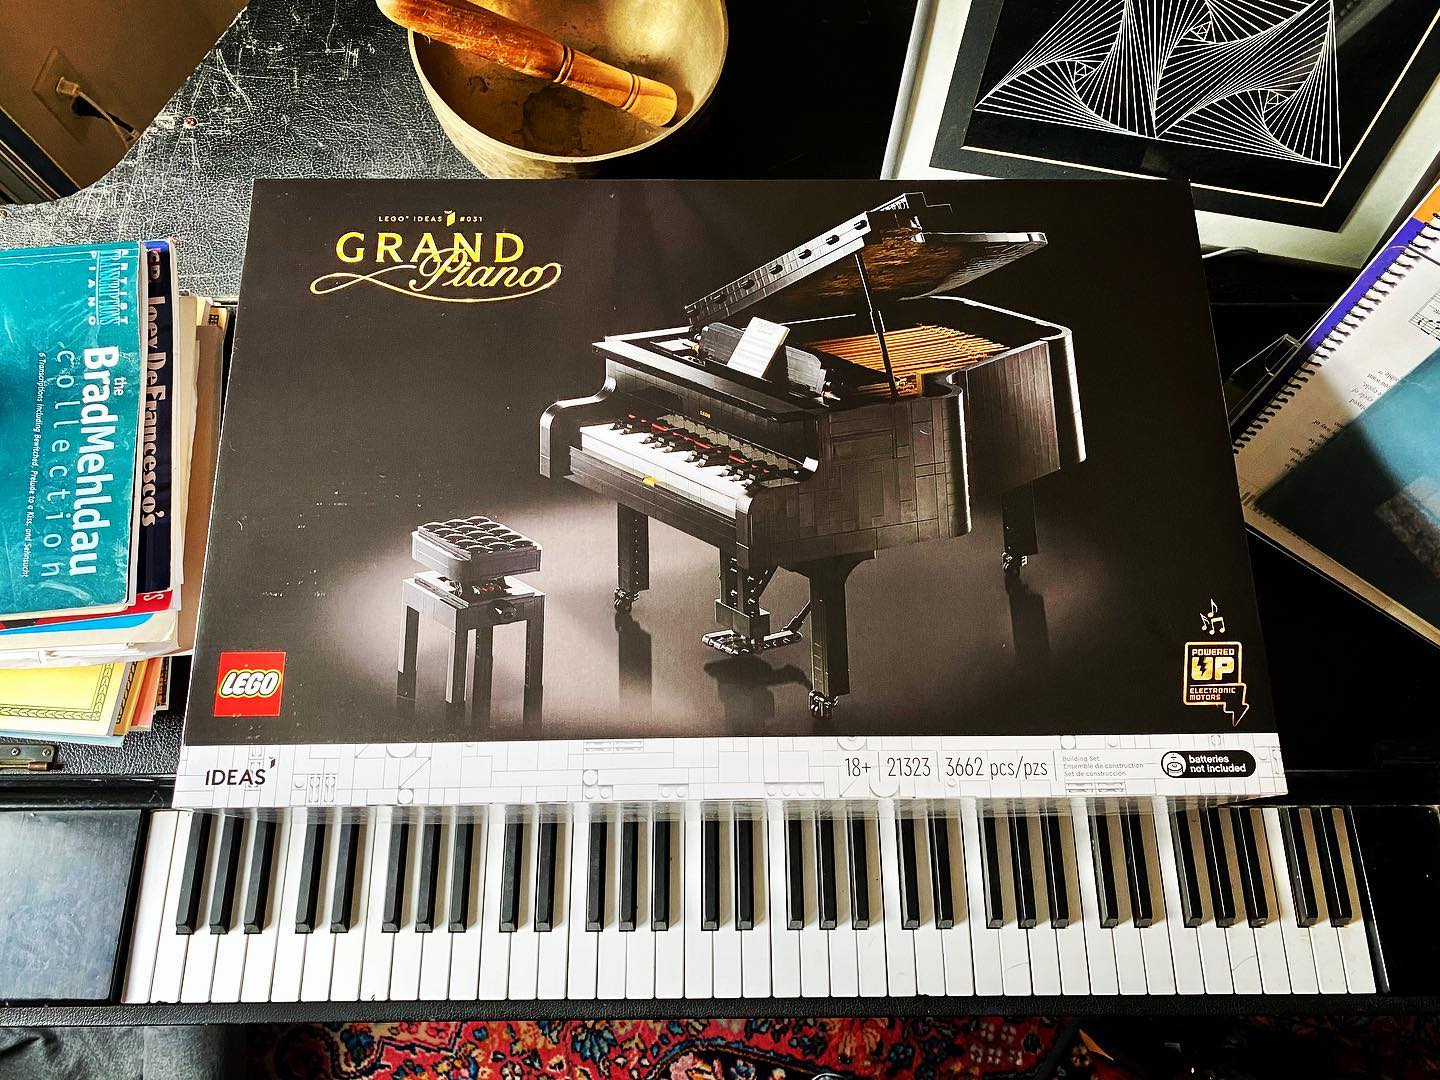 This should keep the family busy.  #legograndpiano #legogram